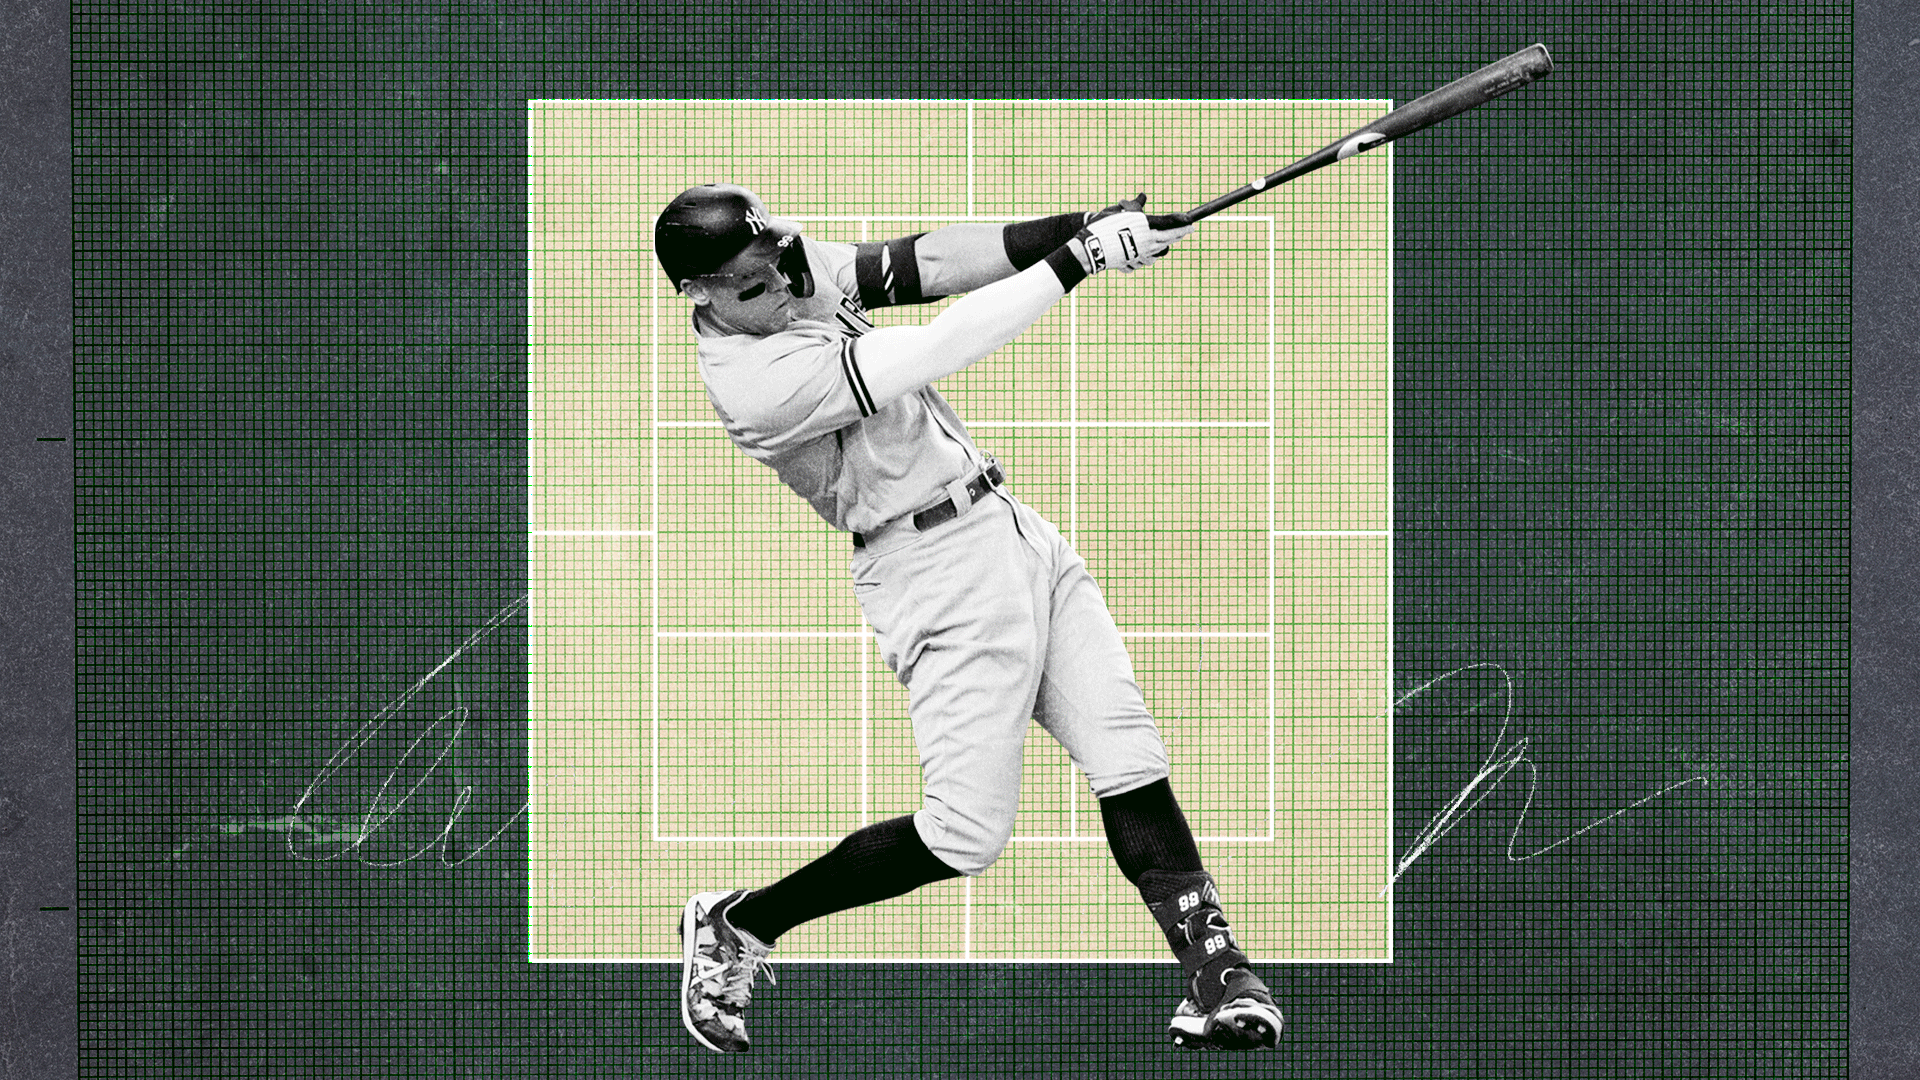 Photo Illustration of Aaron Judge swinging at bat with a grid behind him.